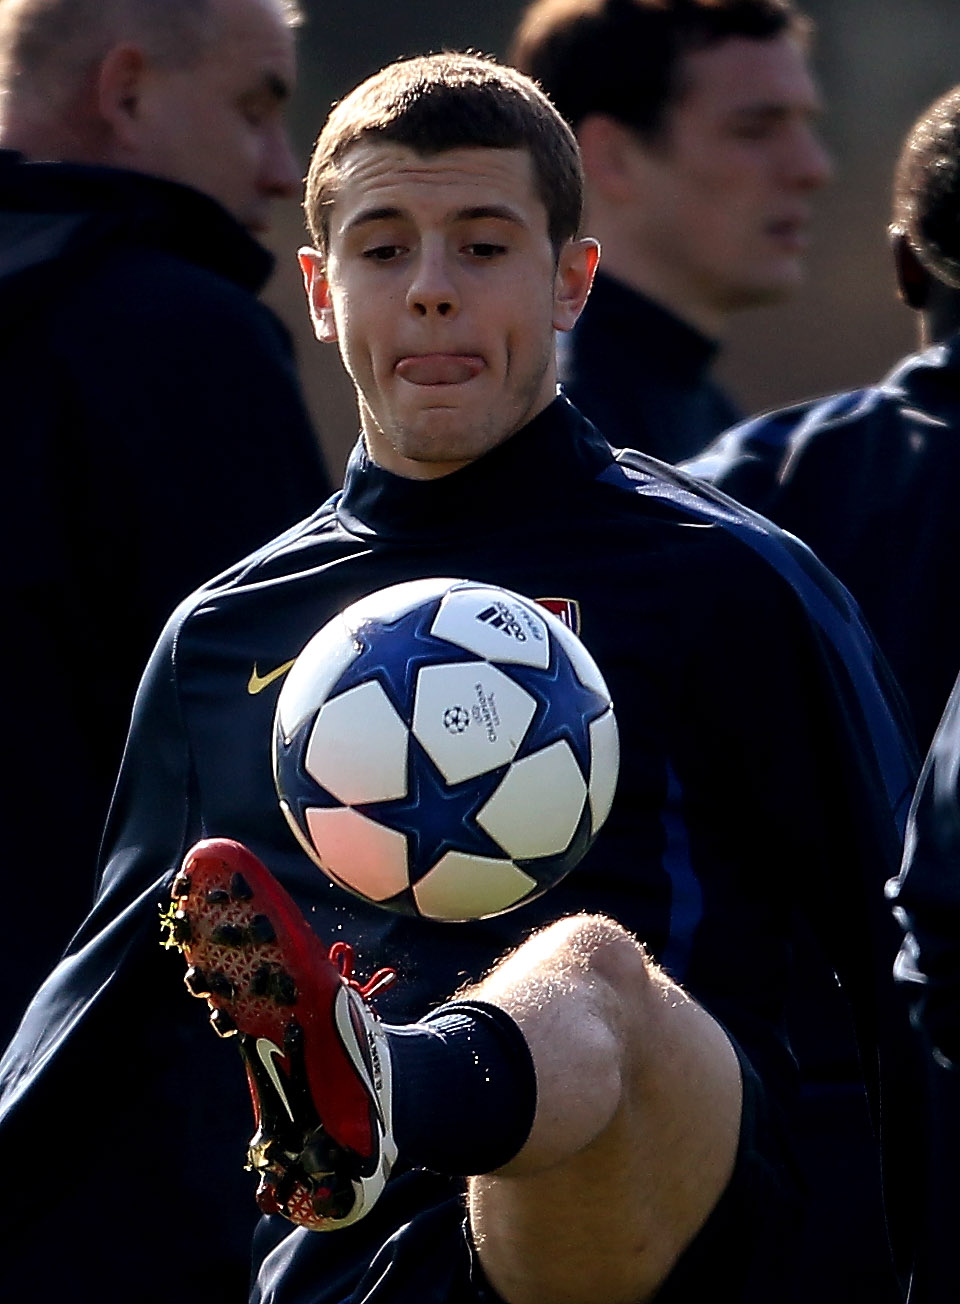 ST ALBANS, ENGLAND - MARCH 07:  Jack Wilshire of Arsenal during a training session ahead of the UEFA Champions League Round of 16 second leg match against Barcelona at London Colney on March 7, 2011 in St Albans, England.  (Photo by Scott Heavey/Getty Ima